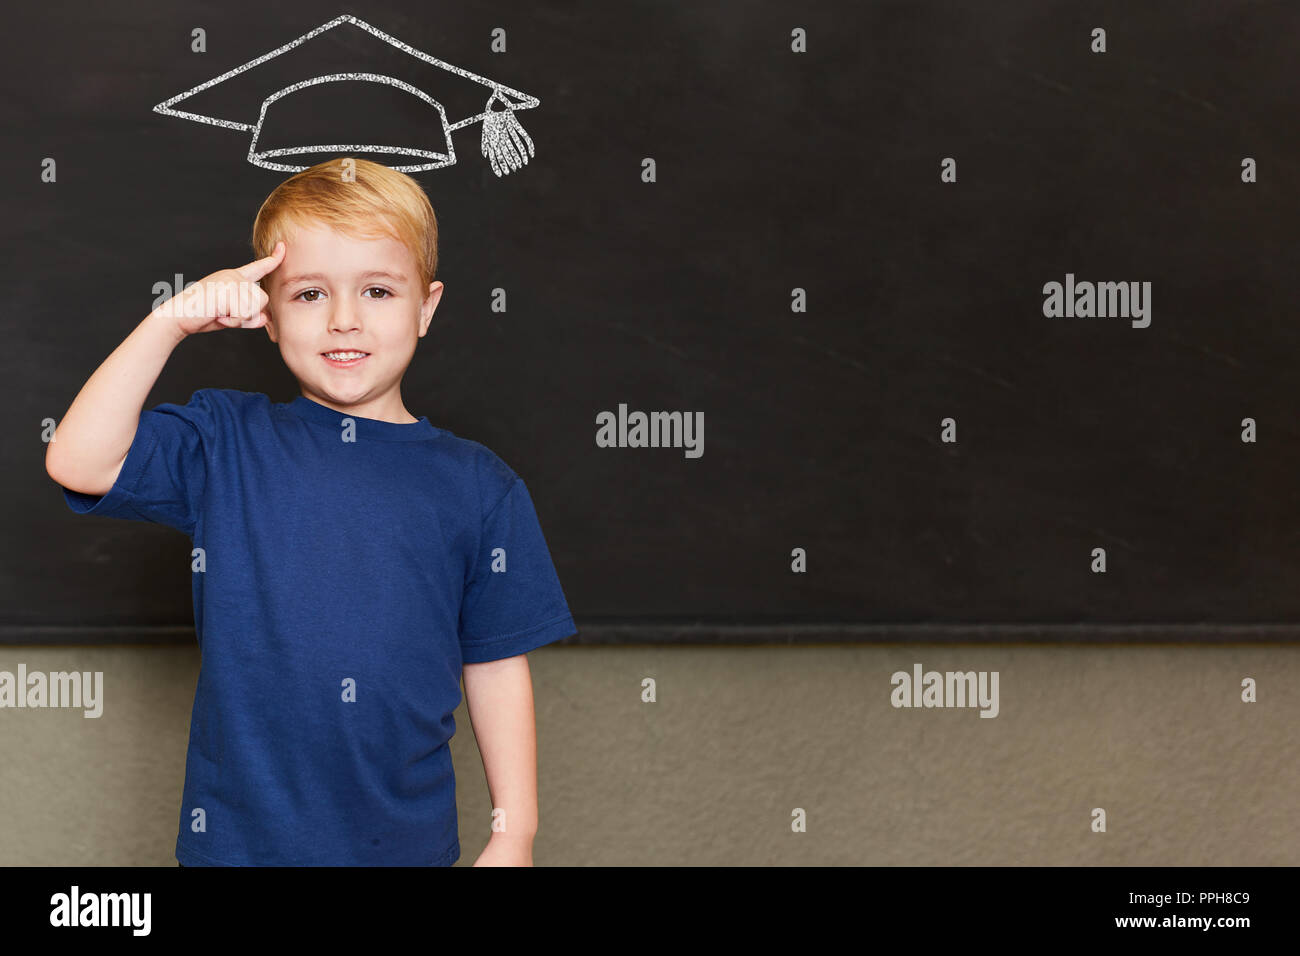 Pupils in school in front of blackboard with mortarboard as a symbol of knowledge and education Stock Photo